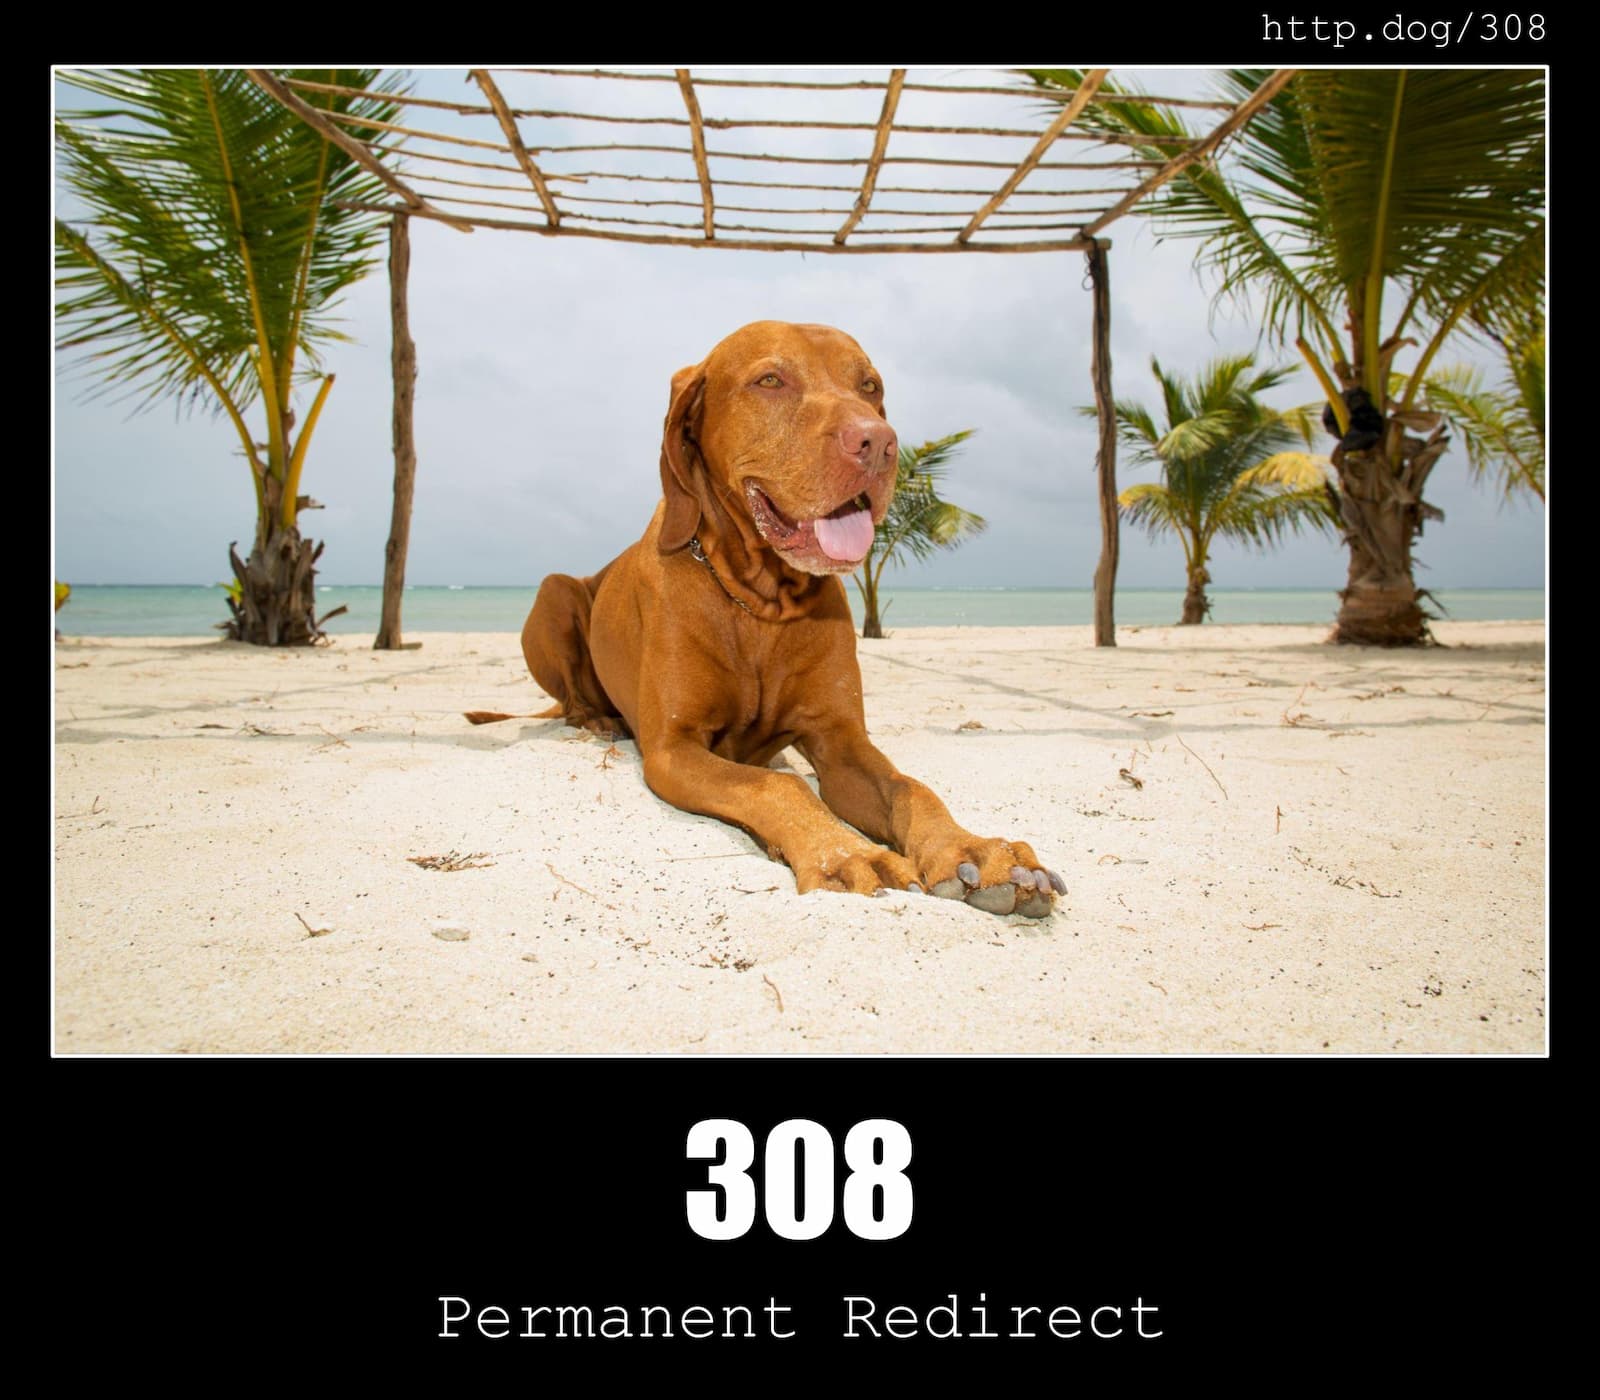 HTTP Status Code 308 Permanent Redirect & Dogs